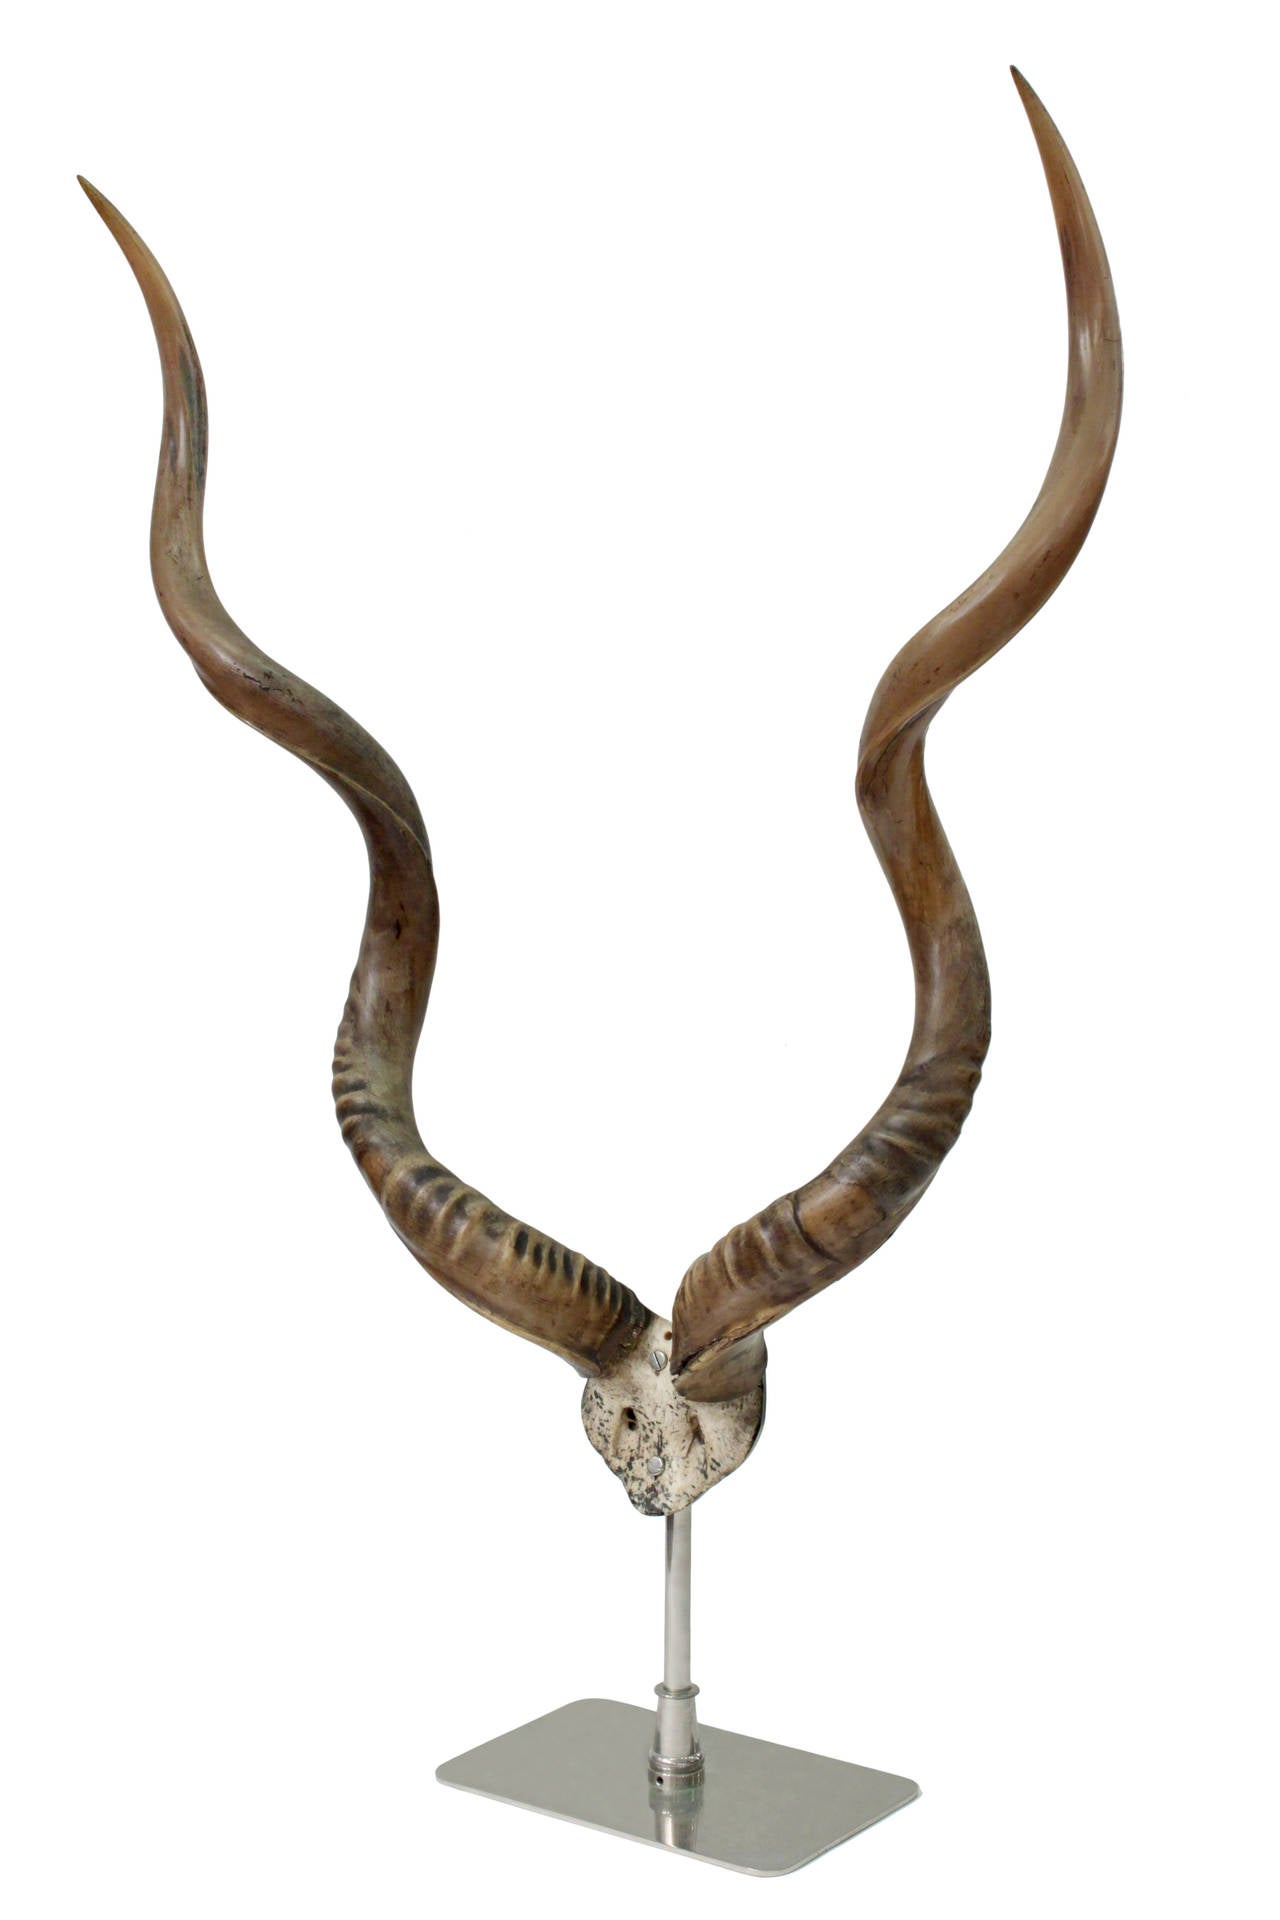 Mounted large African antelope horns on a custom-made nickel base,
American, 1990s.